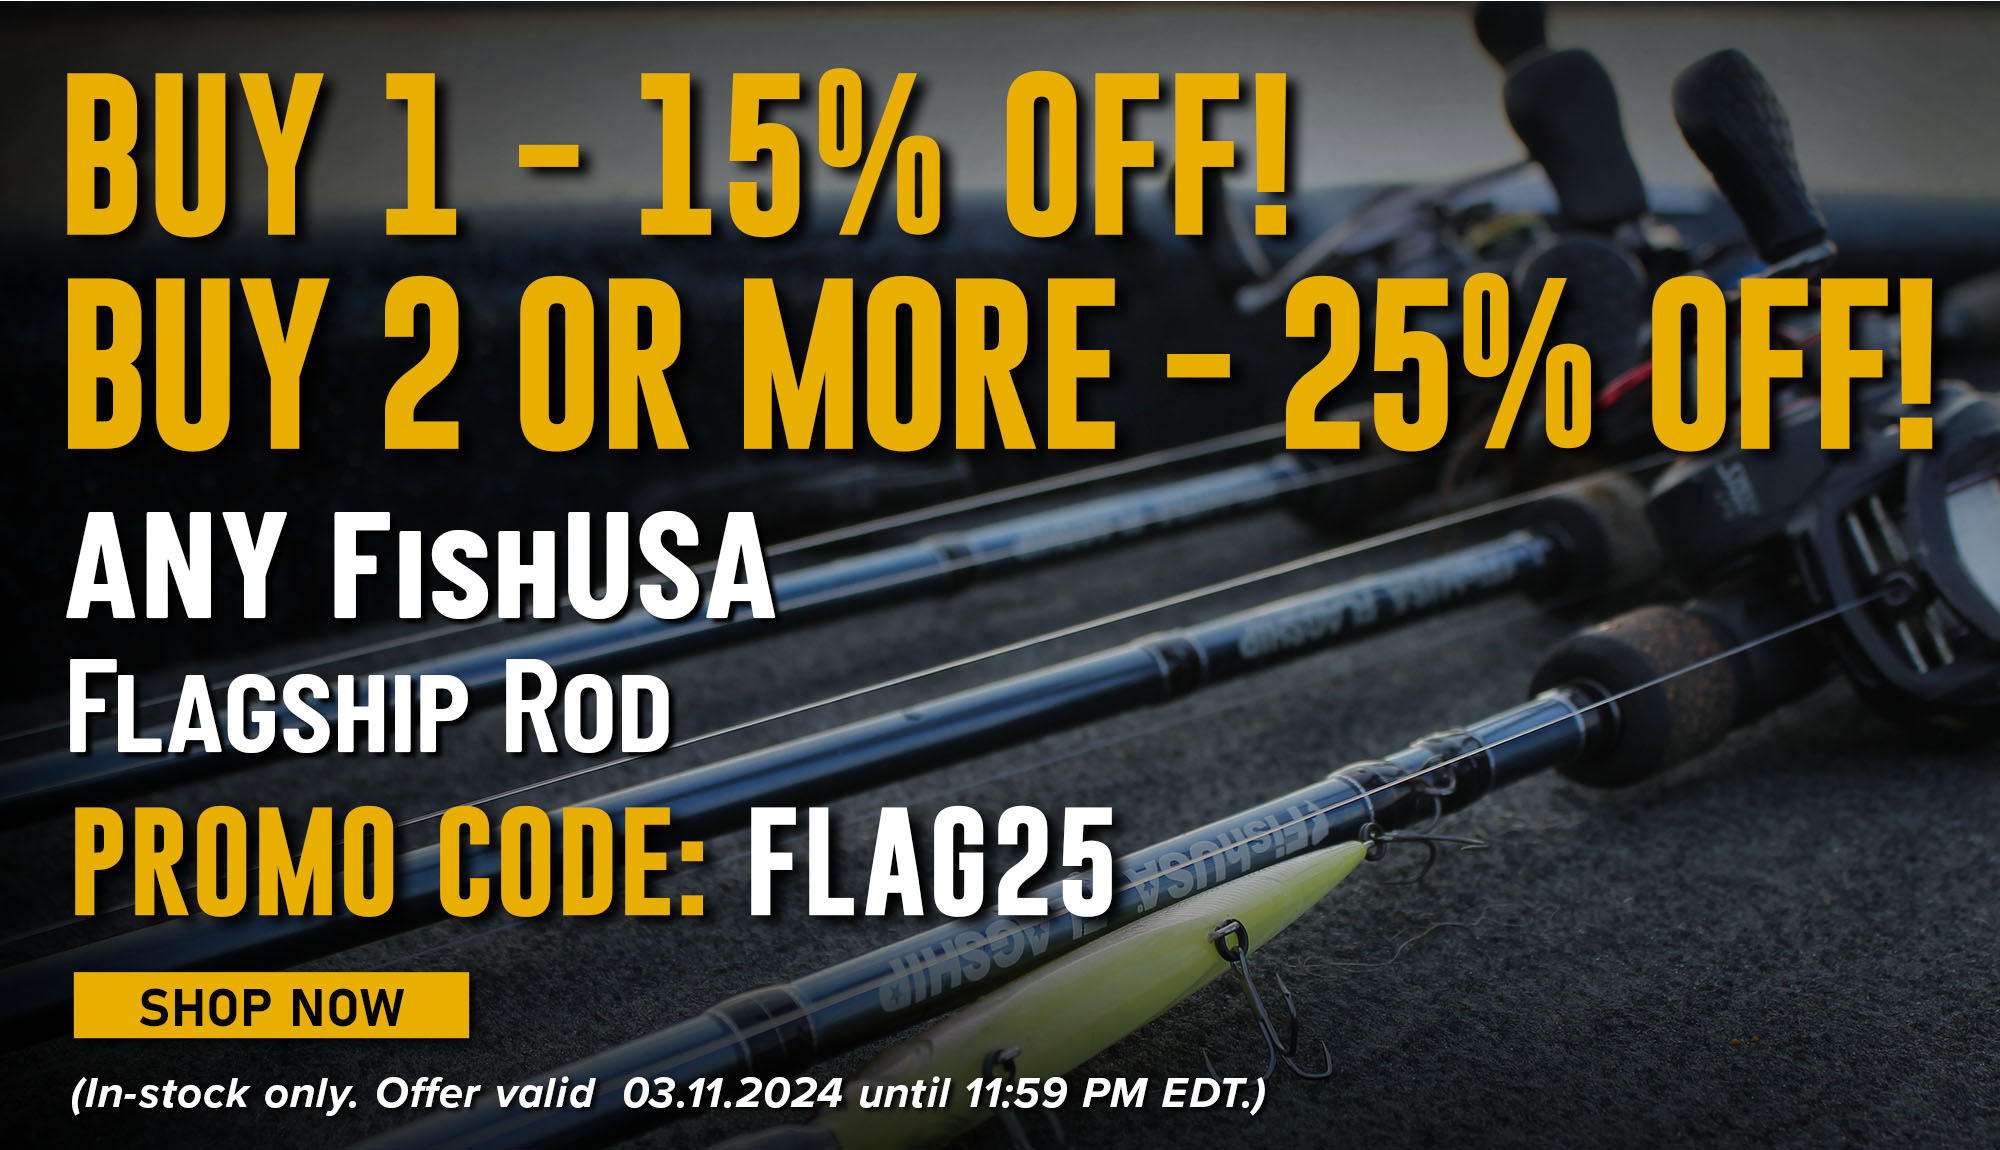 Add to Your Arsenal, Save up to 25% on FishUSA Flagship Rods